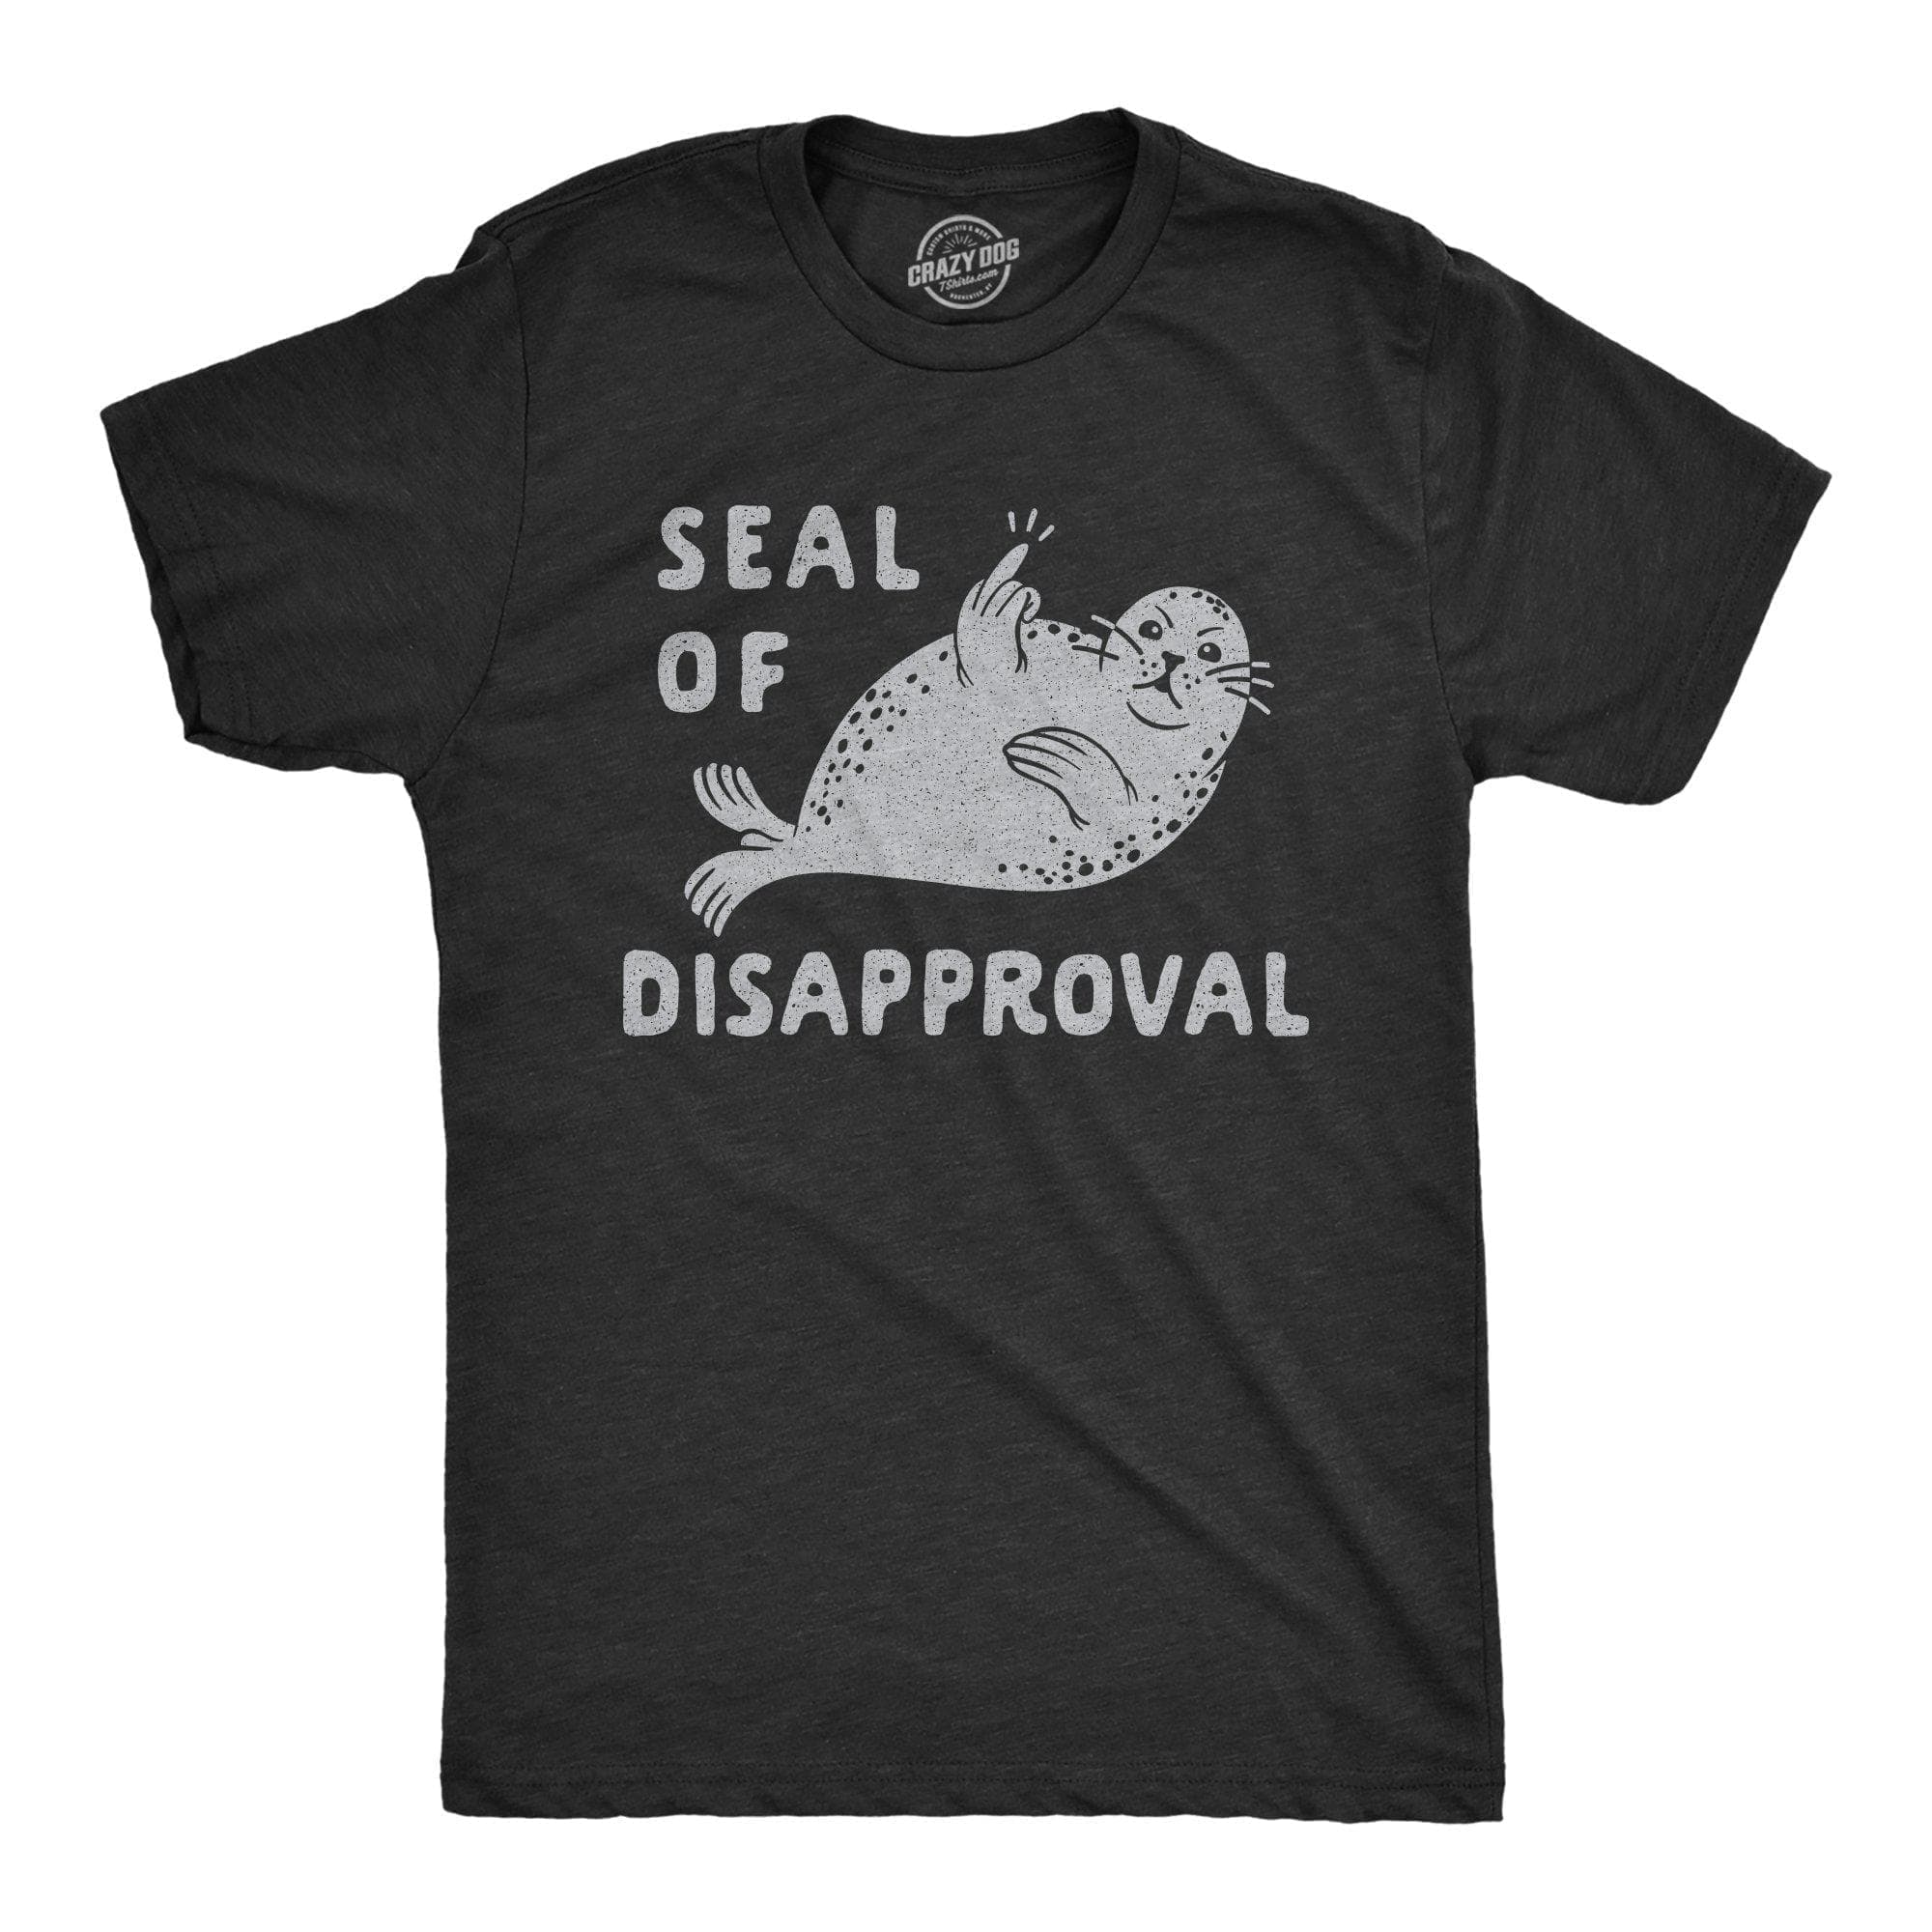 Seal Of Disapproval Men's Tshirt - Crazy Dog T-Shirts